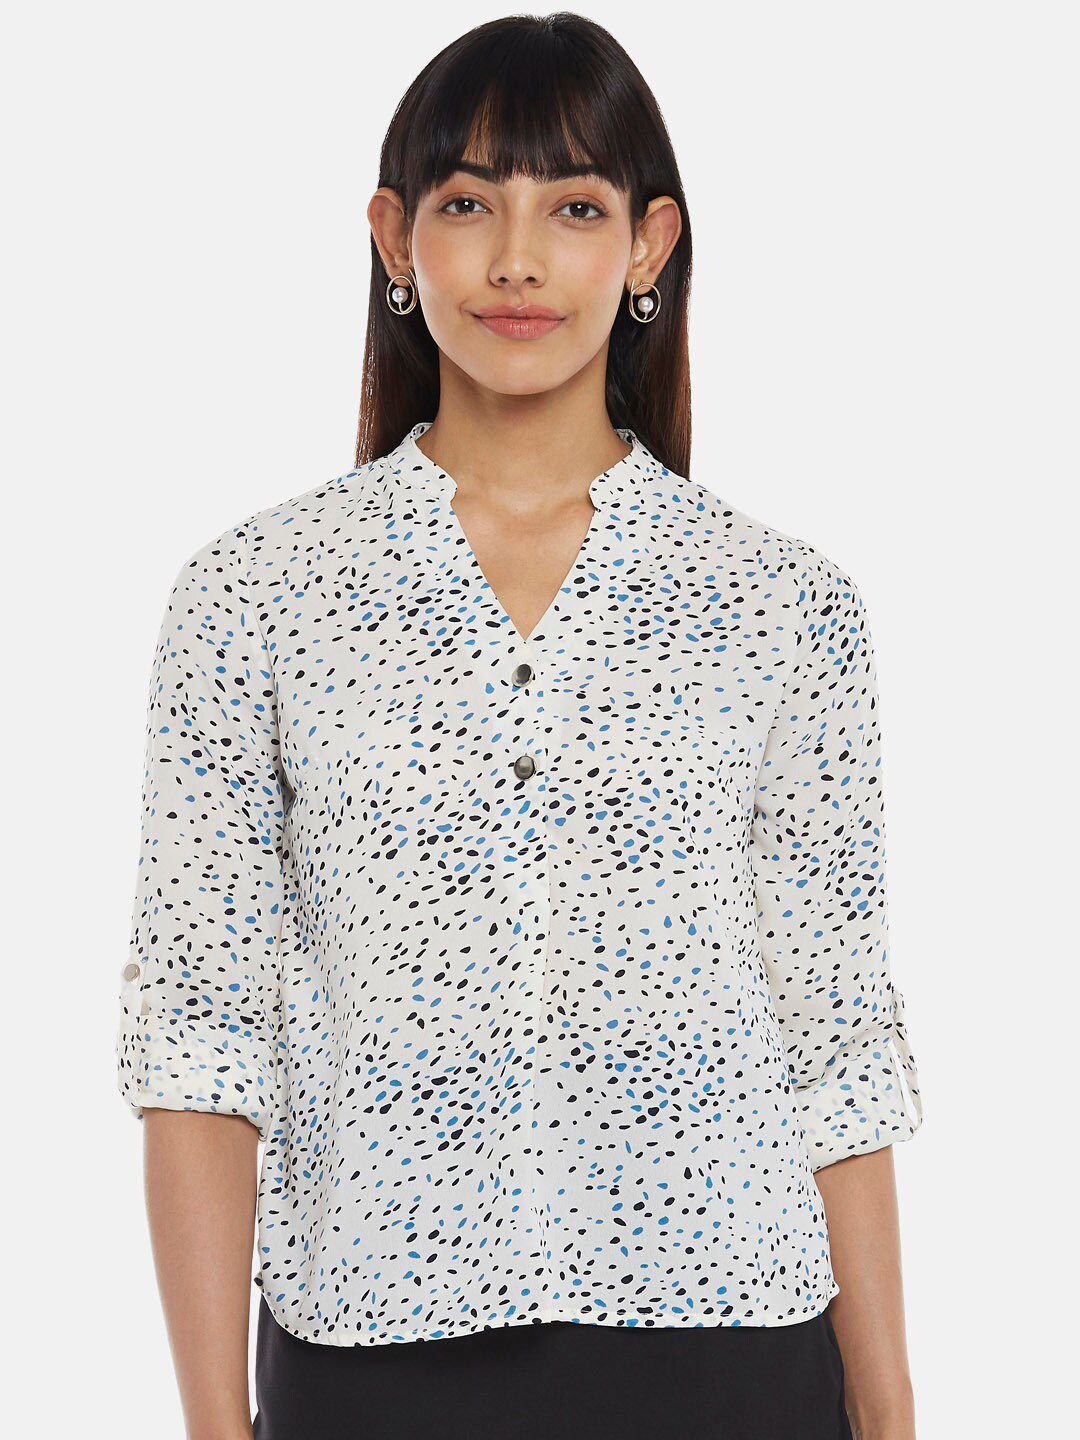 Annabelle by Pantaloons White Print Mandarin Collar Shirt Style Top Price in India